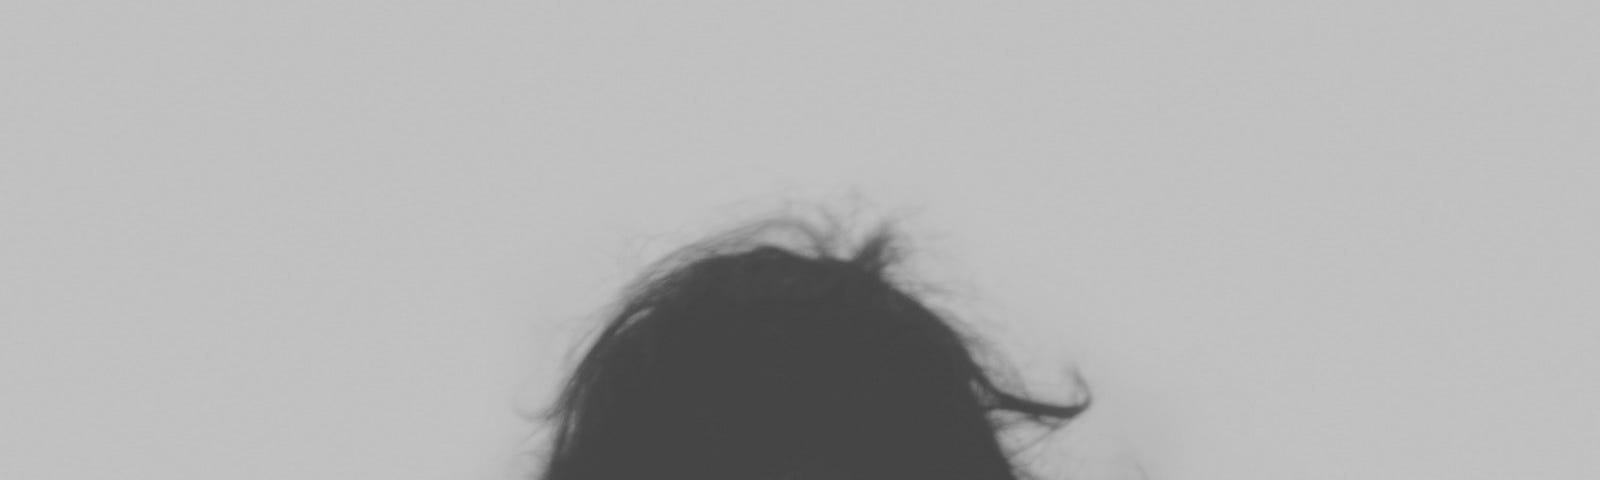 Black and white photo of back of woman with head bowed, in wind.